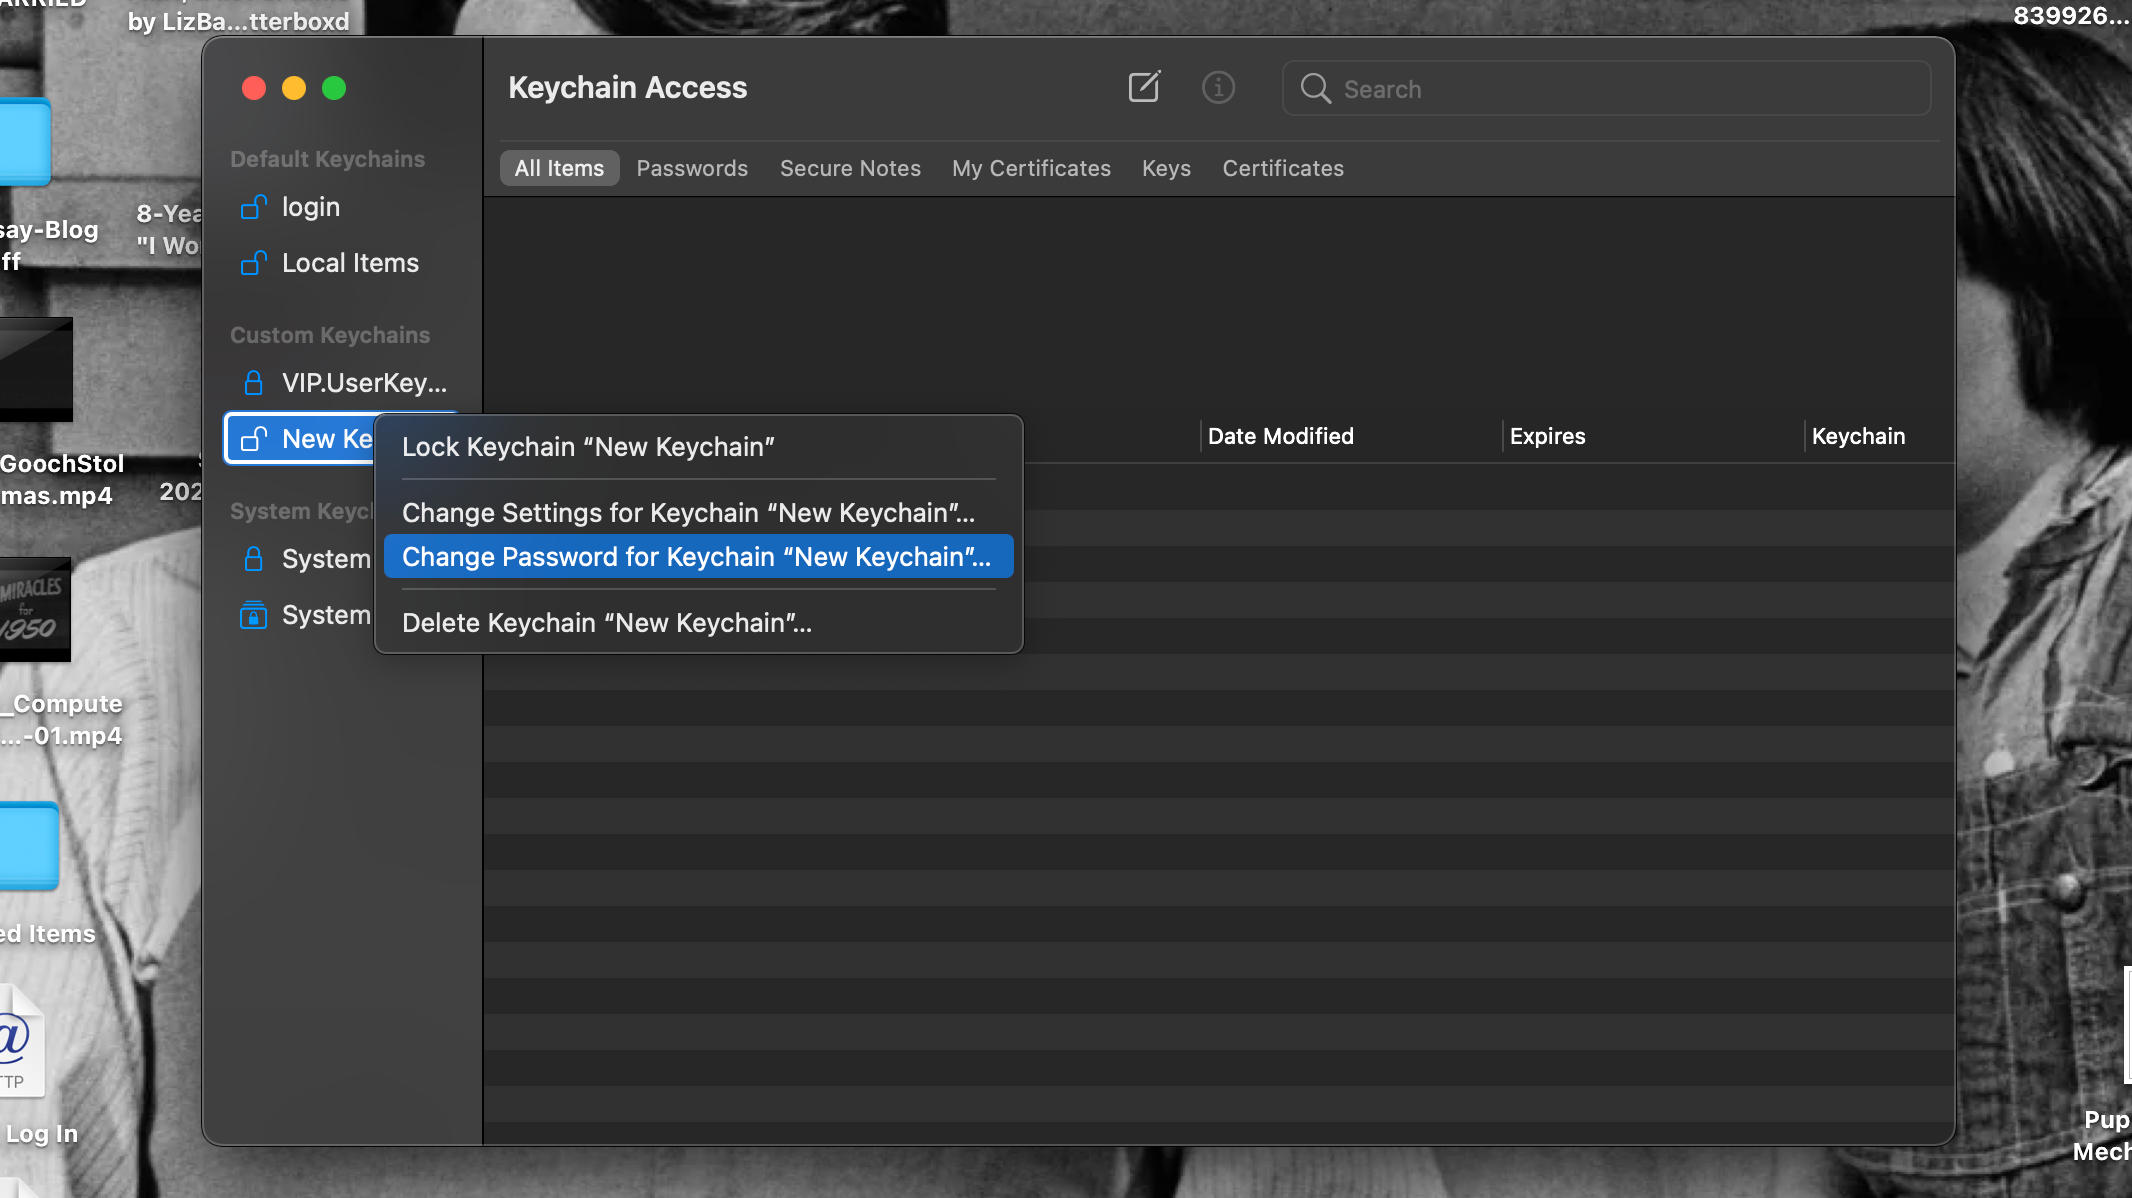 Change keychain password selected in menu in Keychain Access